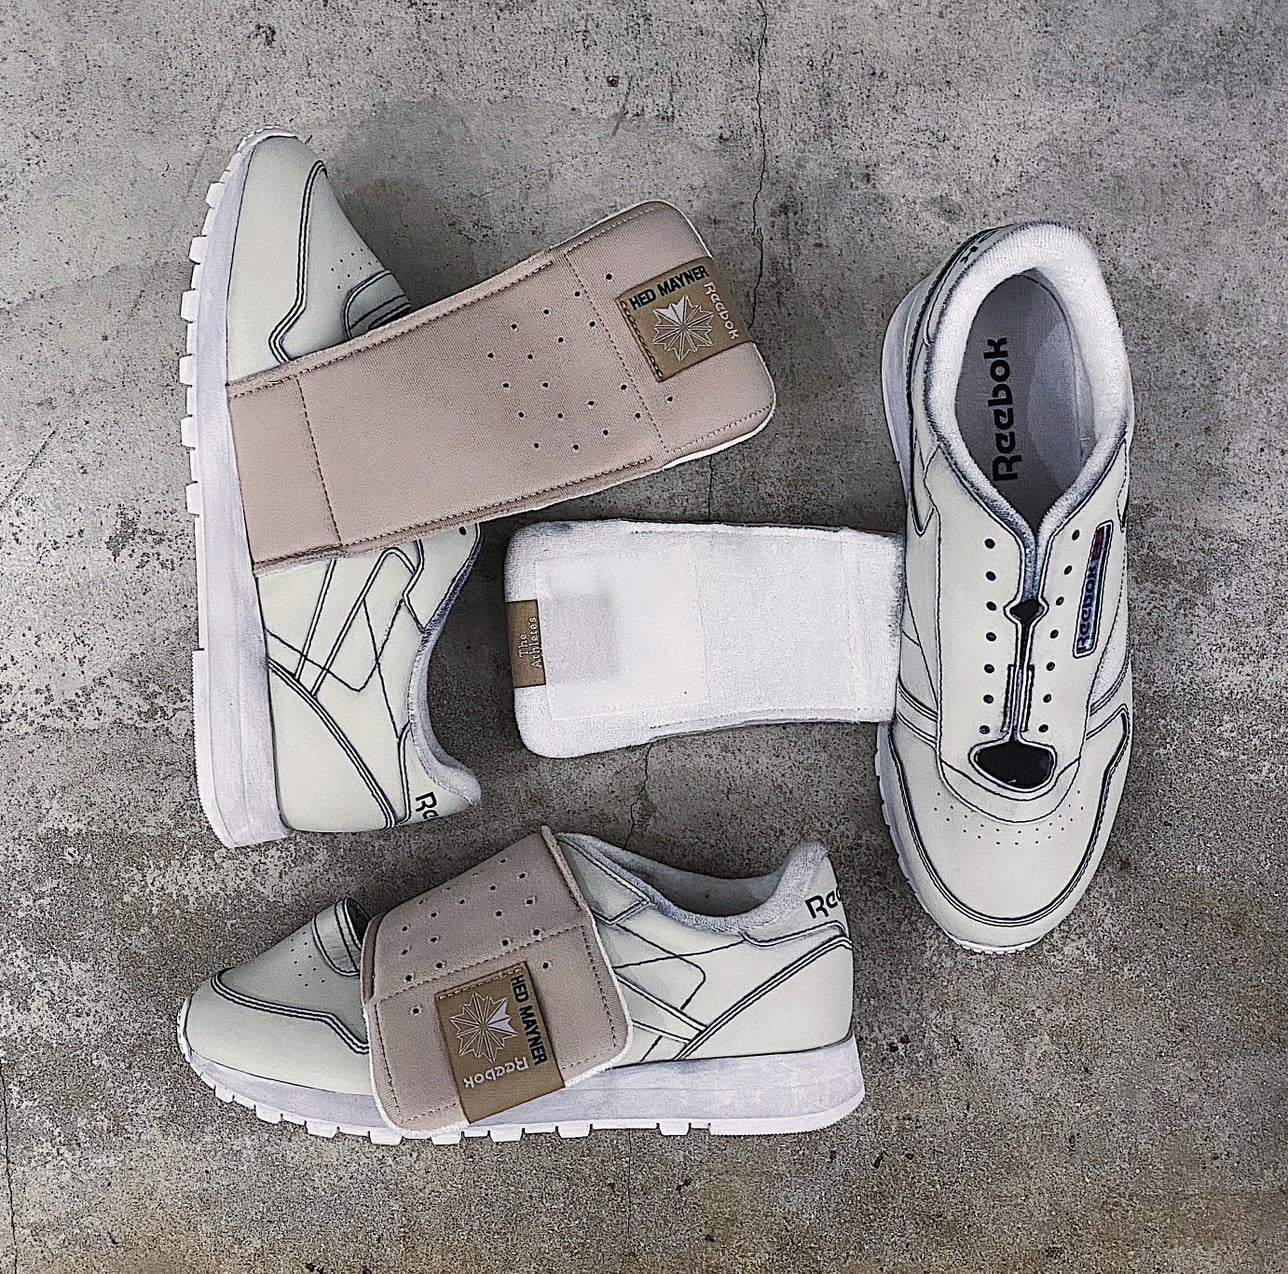 【HED MAYNER×Reebok】<br> Popular collaboration items are now on sale!